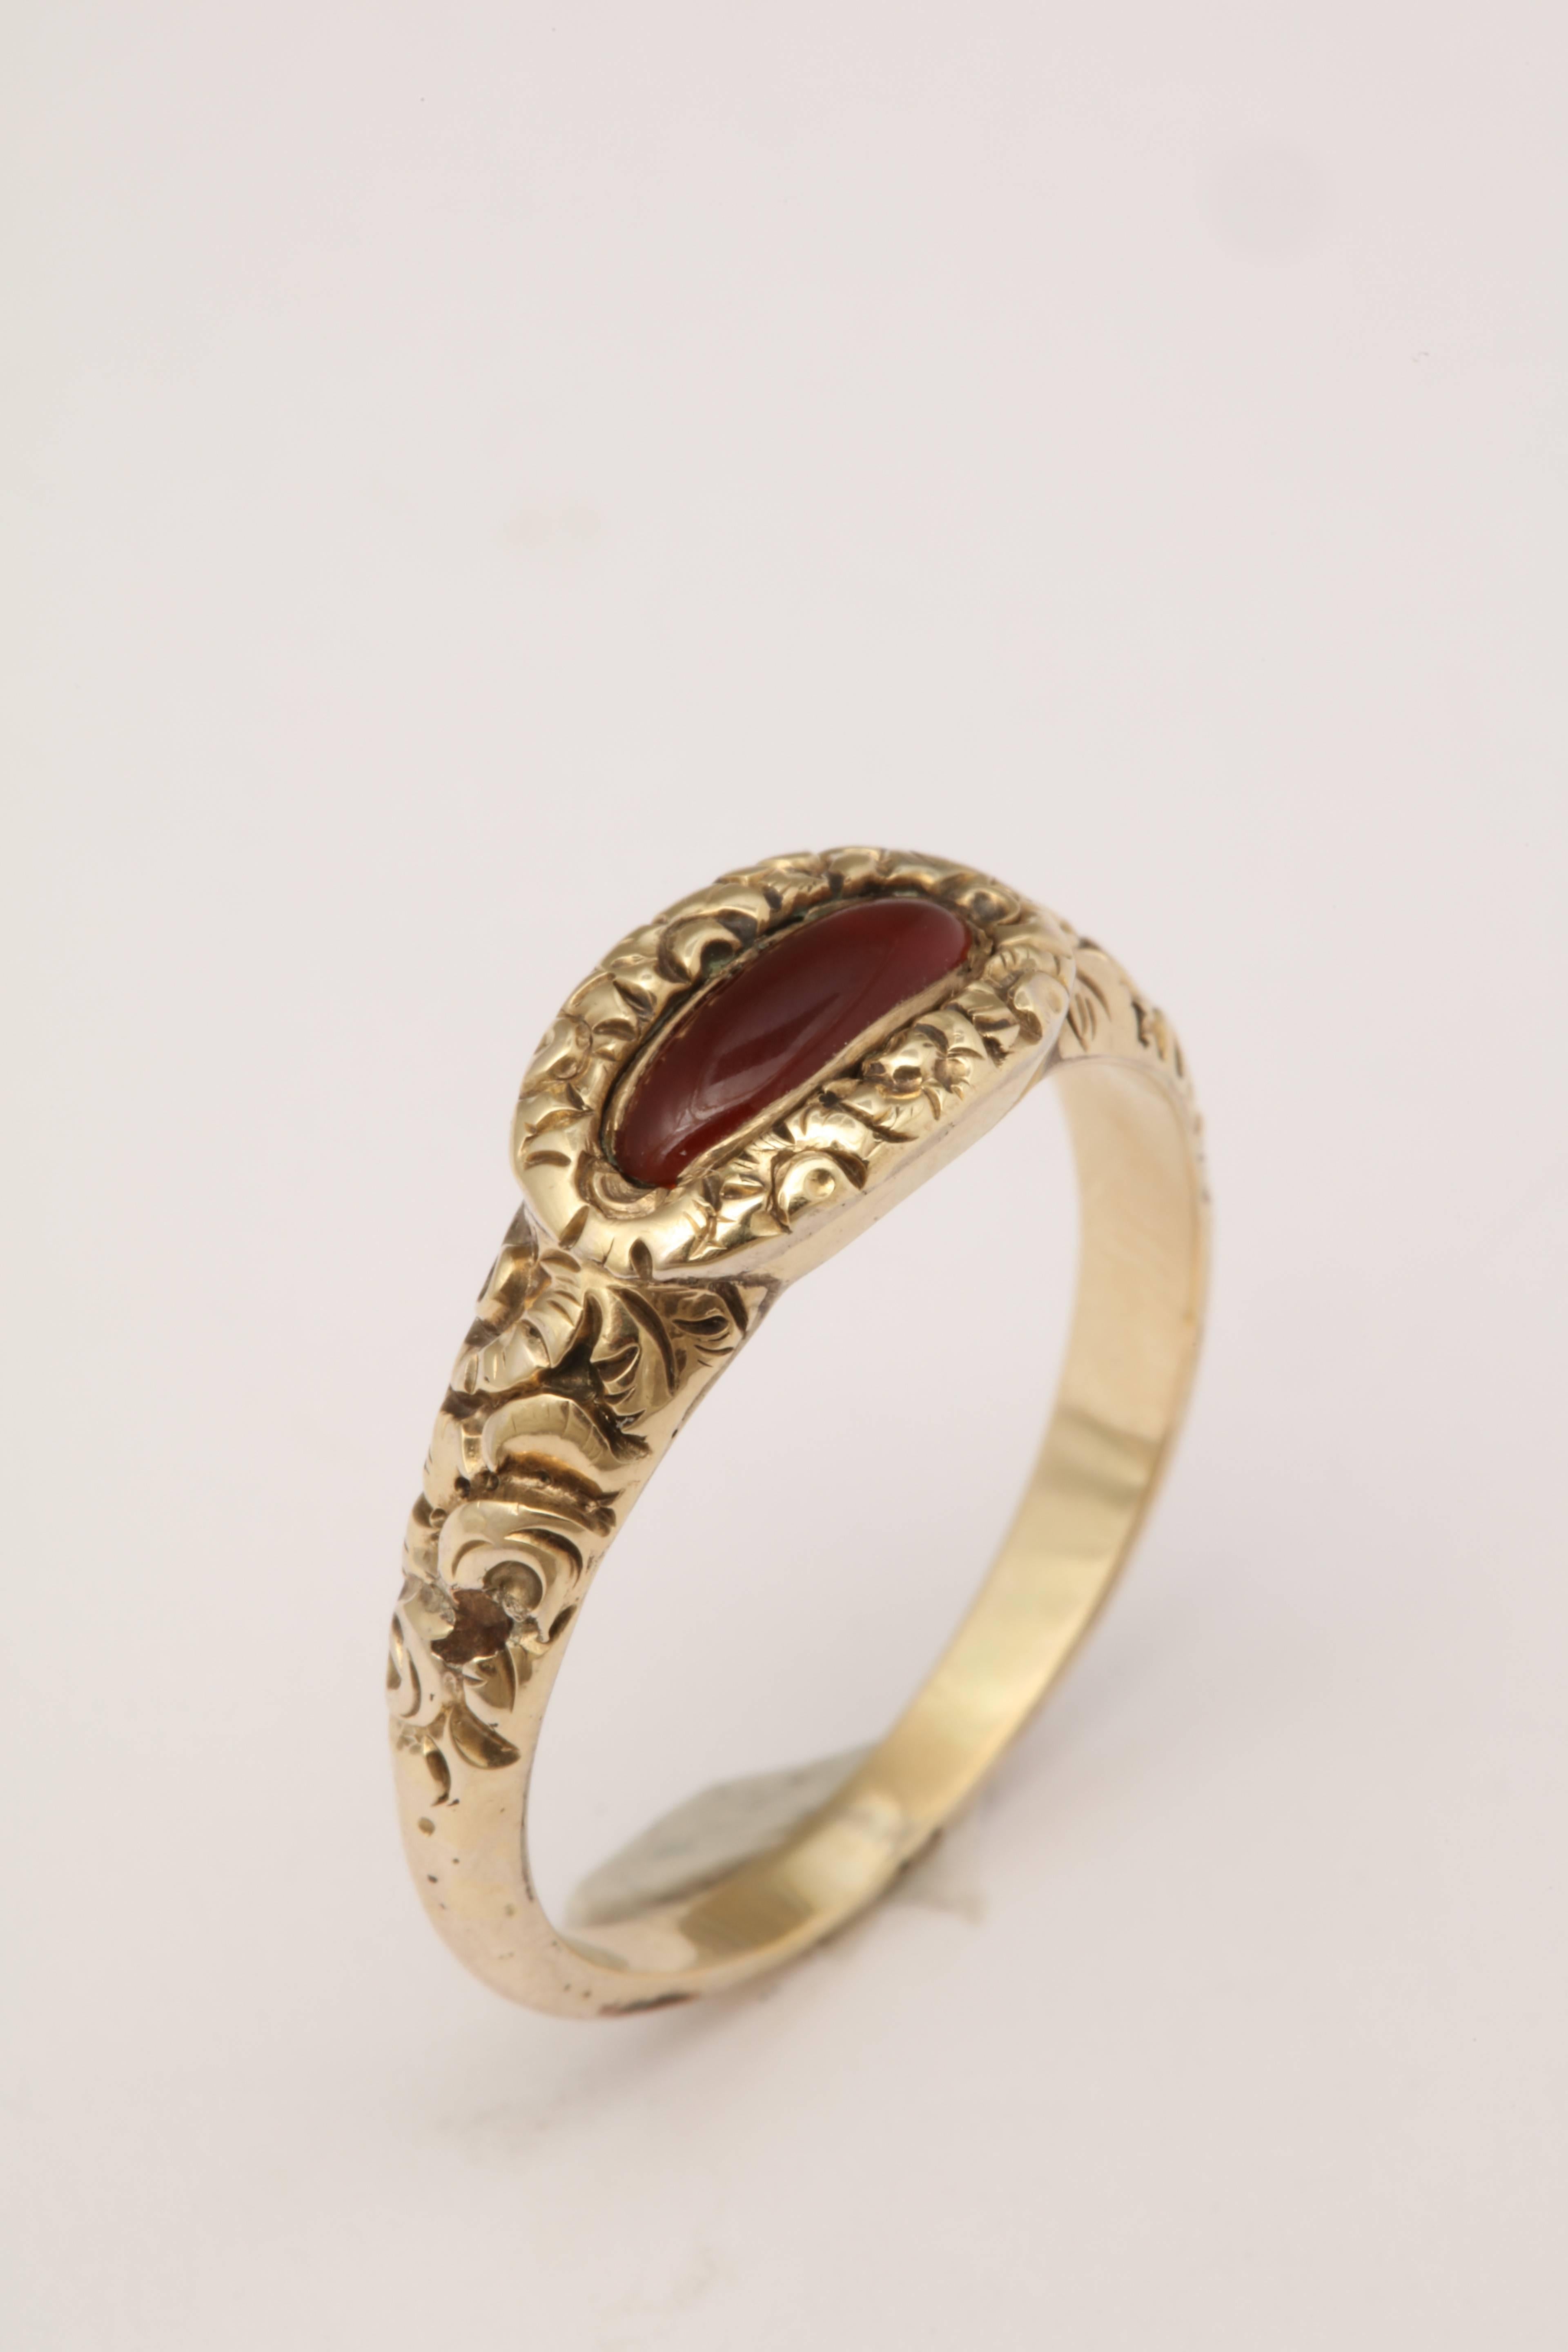 A lovely example of the Georgian style transferring into the Victorian period. This ring is 15kt and heavily engraved. It has a closed back setting with a dark red carnelian. 